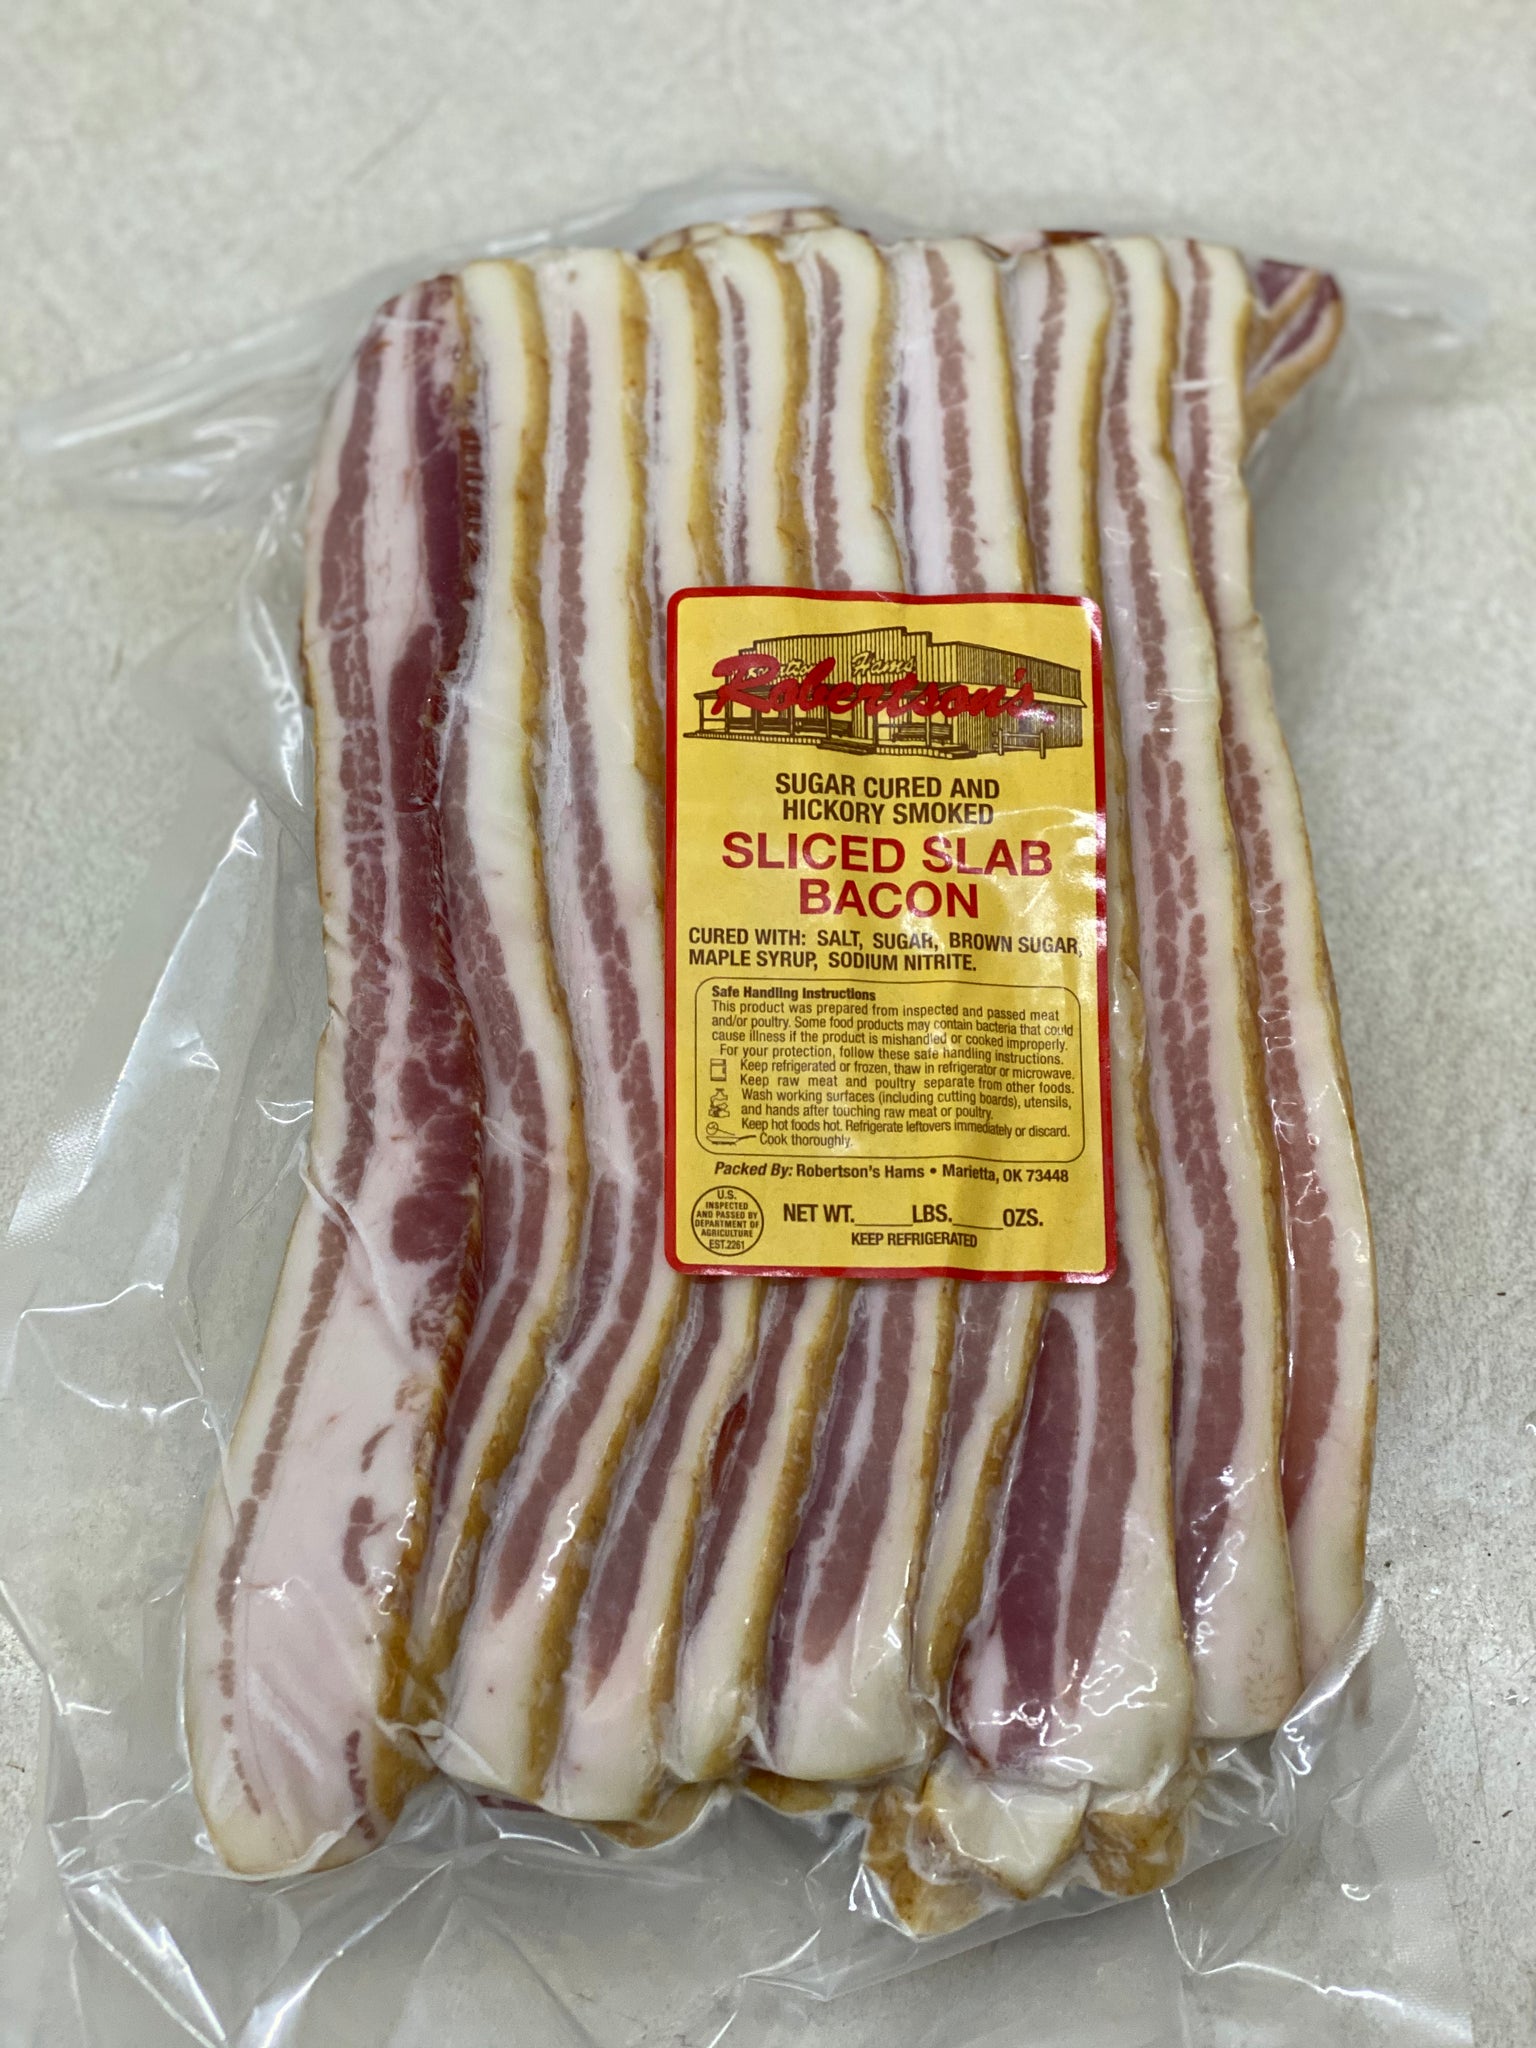 Sliced Hickory-Smoked Country Bacon